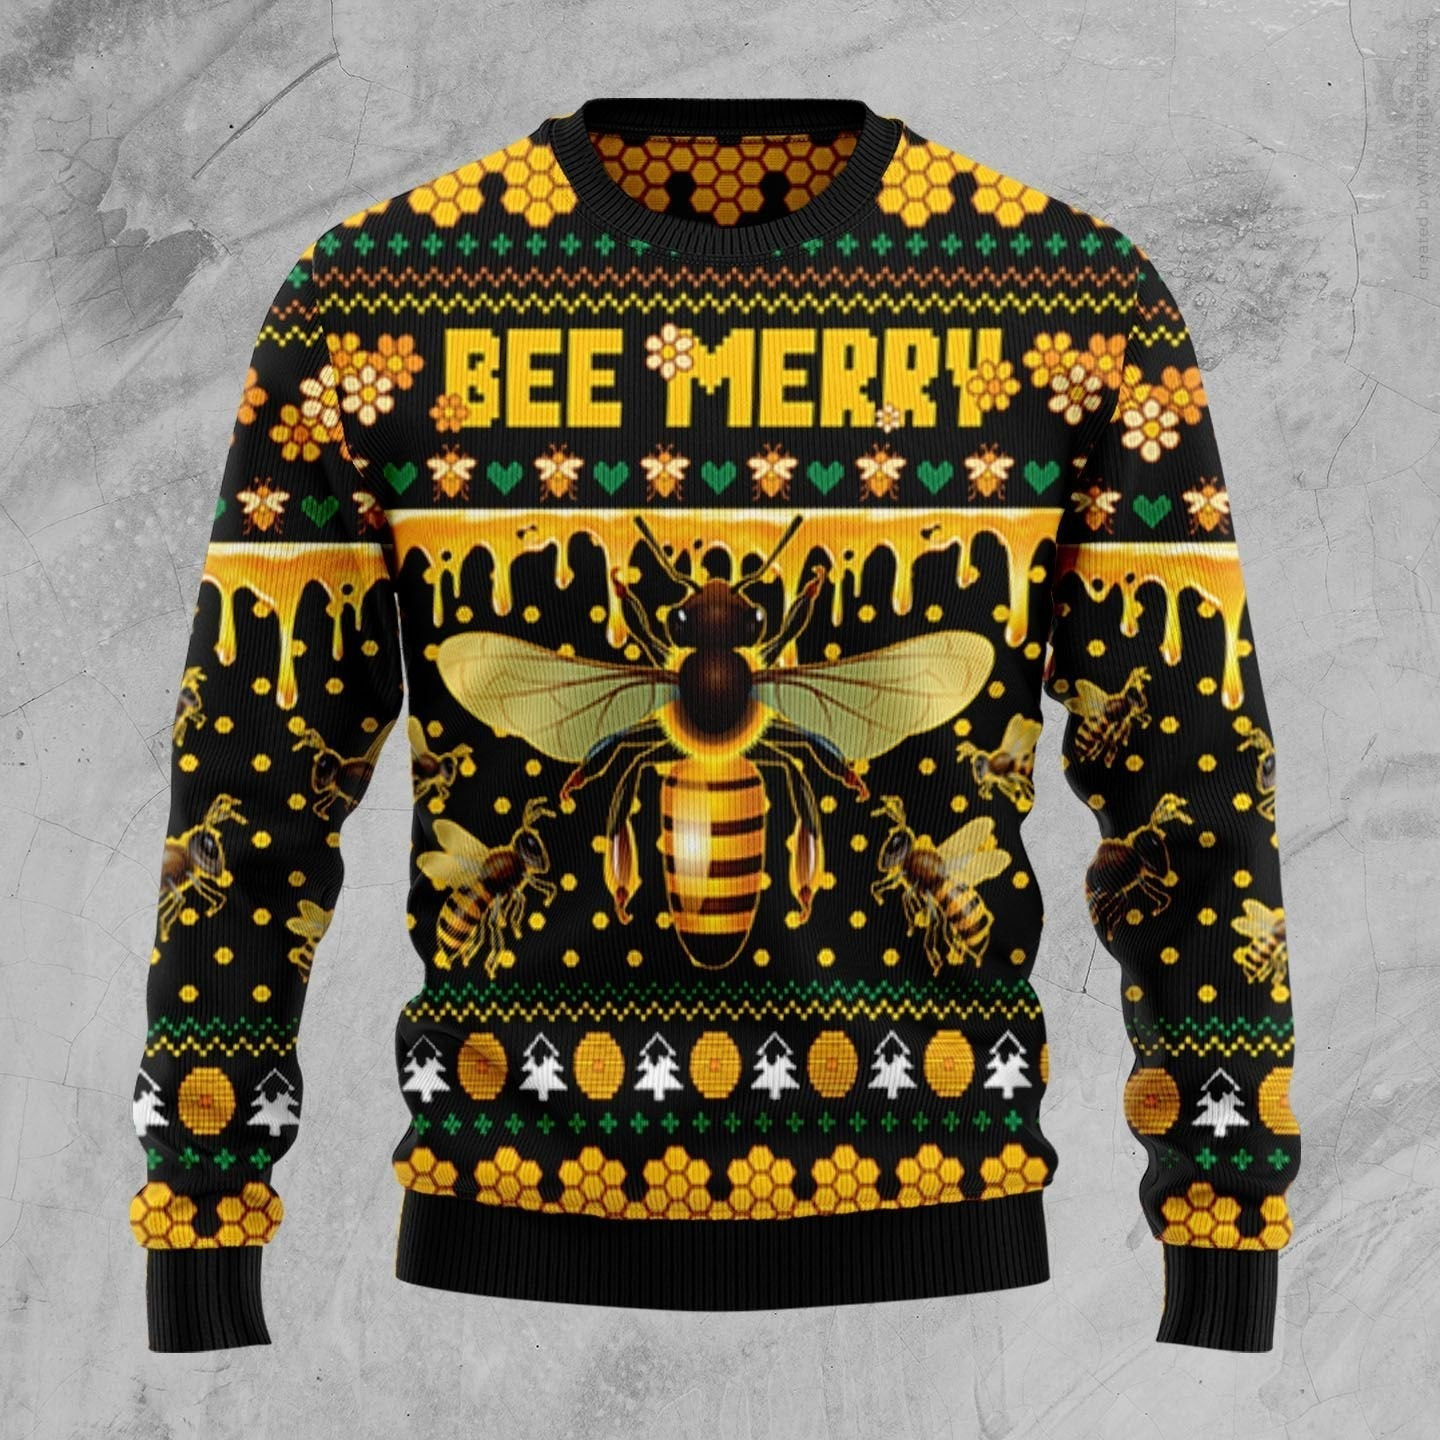 Bee Merry Ugly Christmas Sweater, Ugly Sweater For Men Women, Holiday Sweater